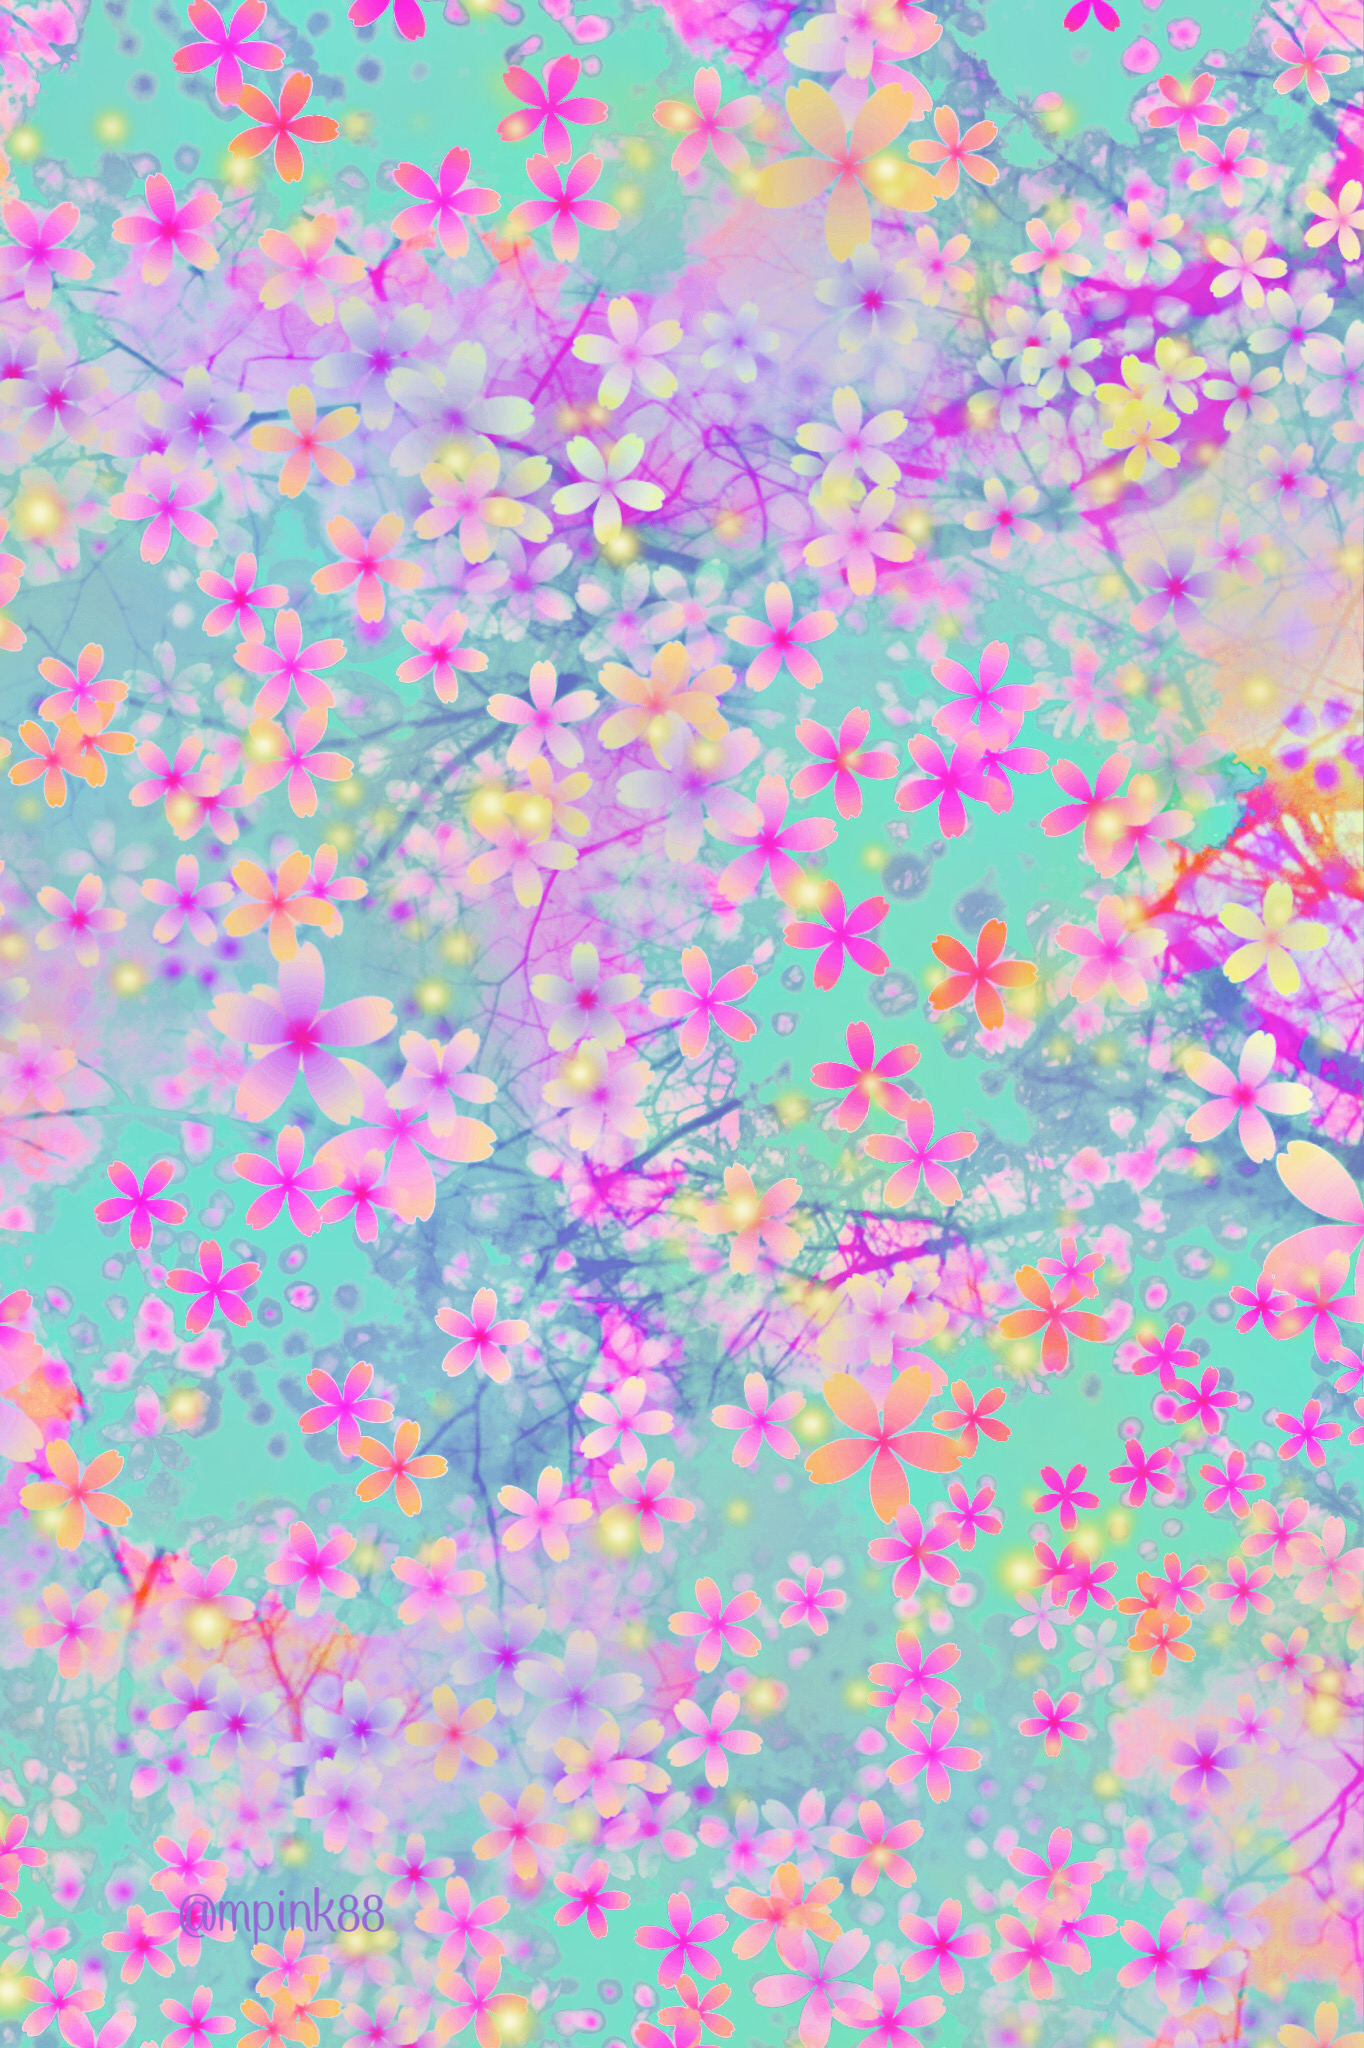 #freetoedit @mpink88 #glitter #sparkle #galaxyeye #sky #flowers #floral #cherryblossoms #colorful #pastel #fireflies #lights #neon #vintage #cute #girly #n